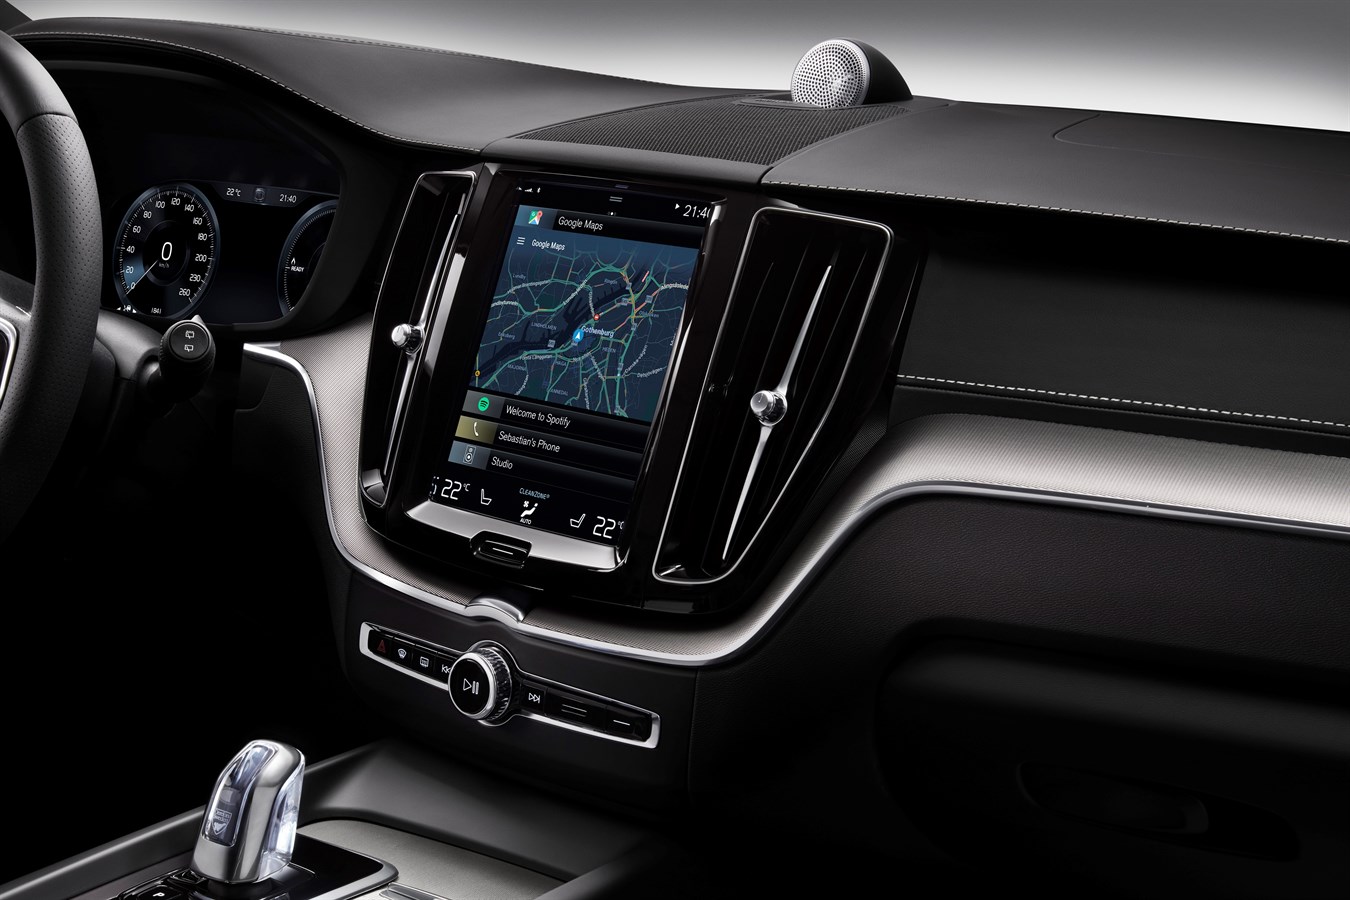 Volvo Cars partners with Google to build Android into next generation connected cars